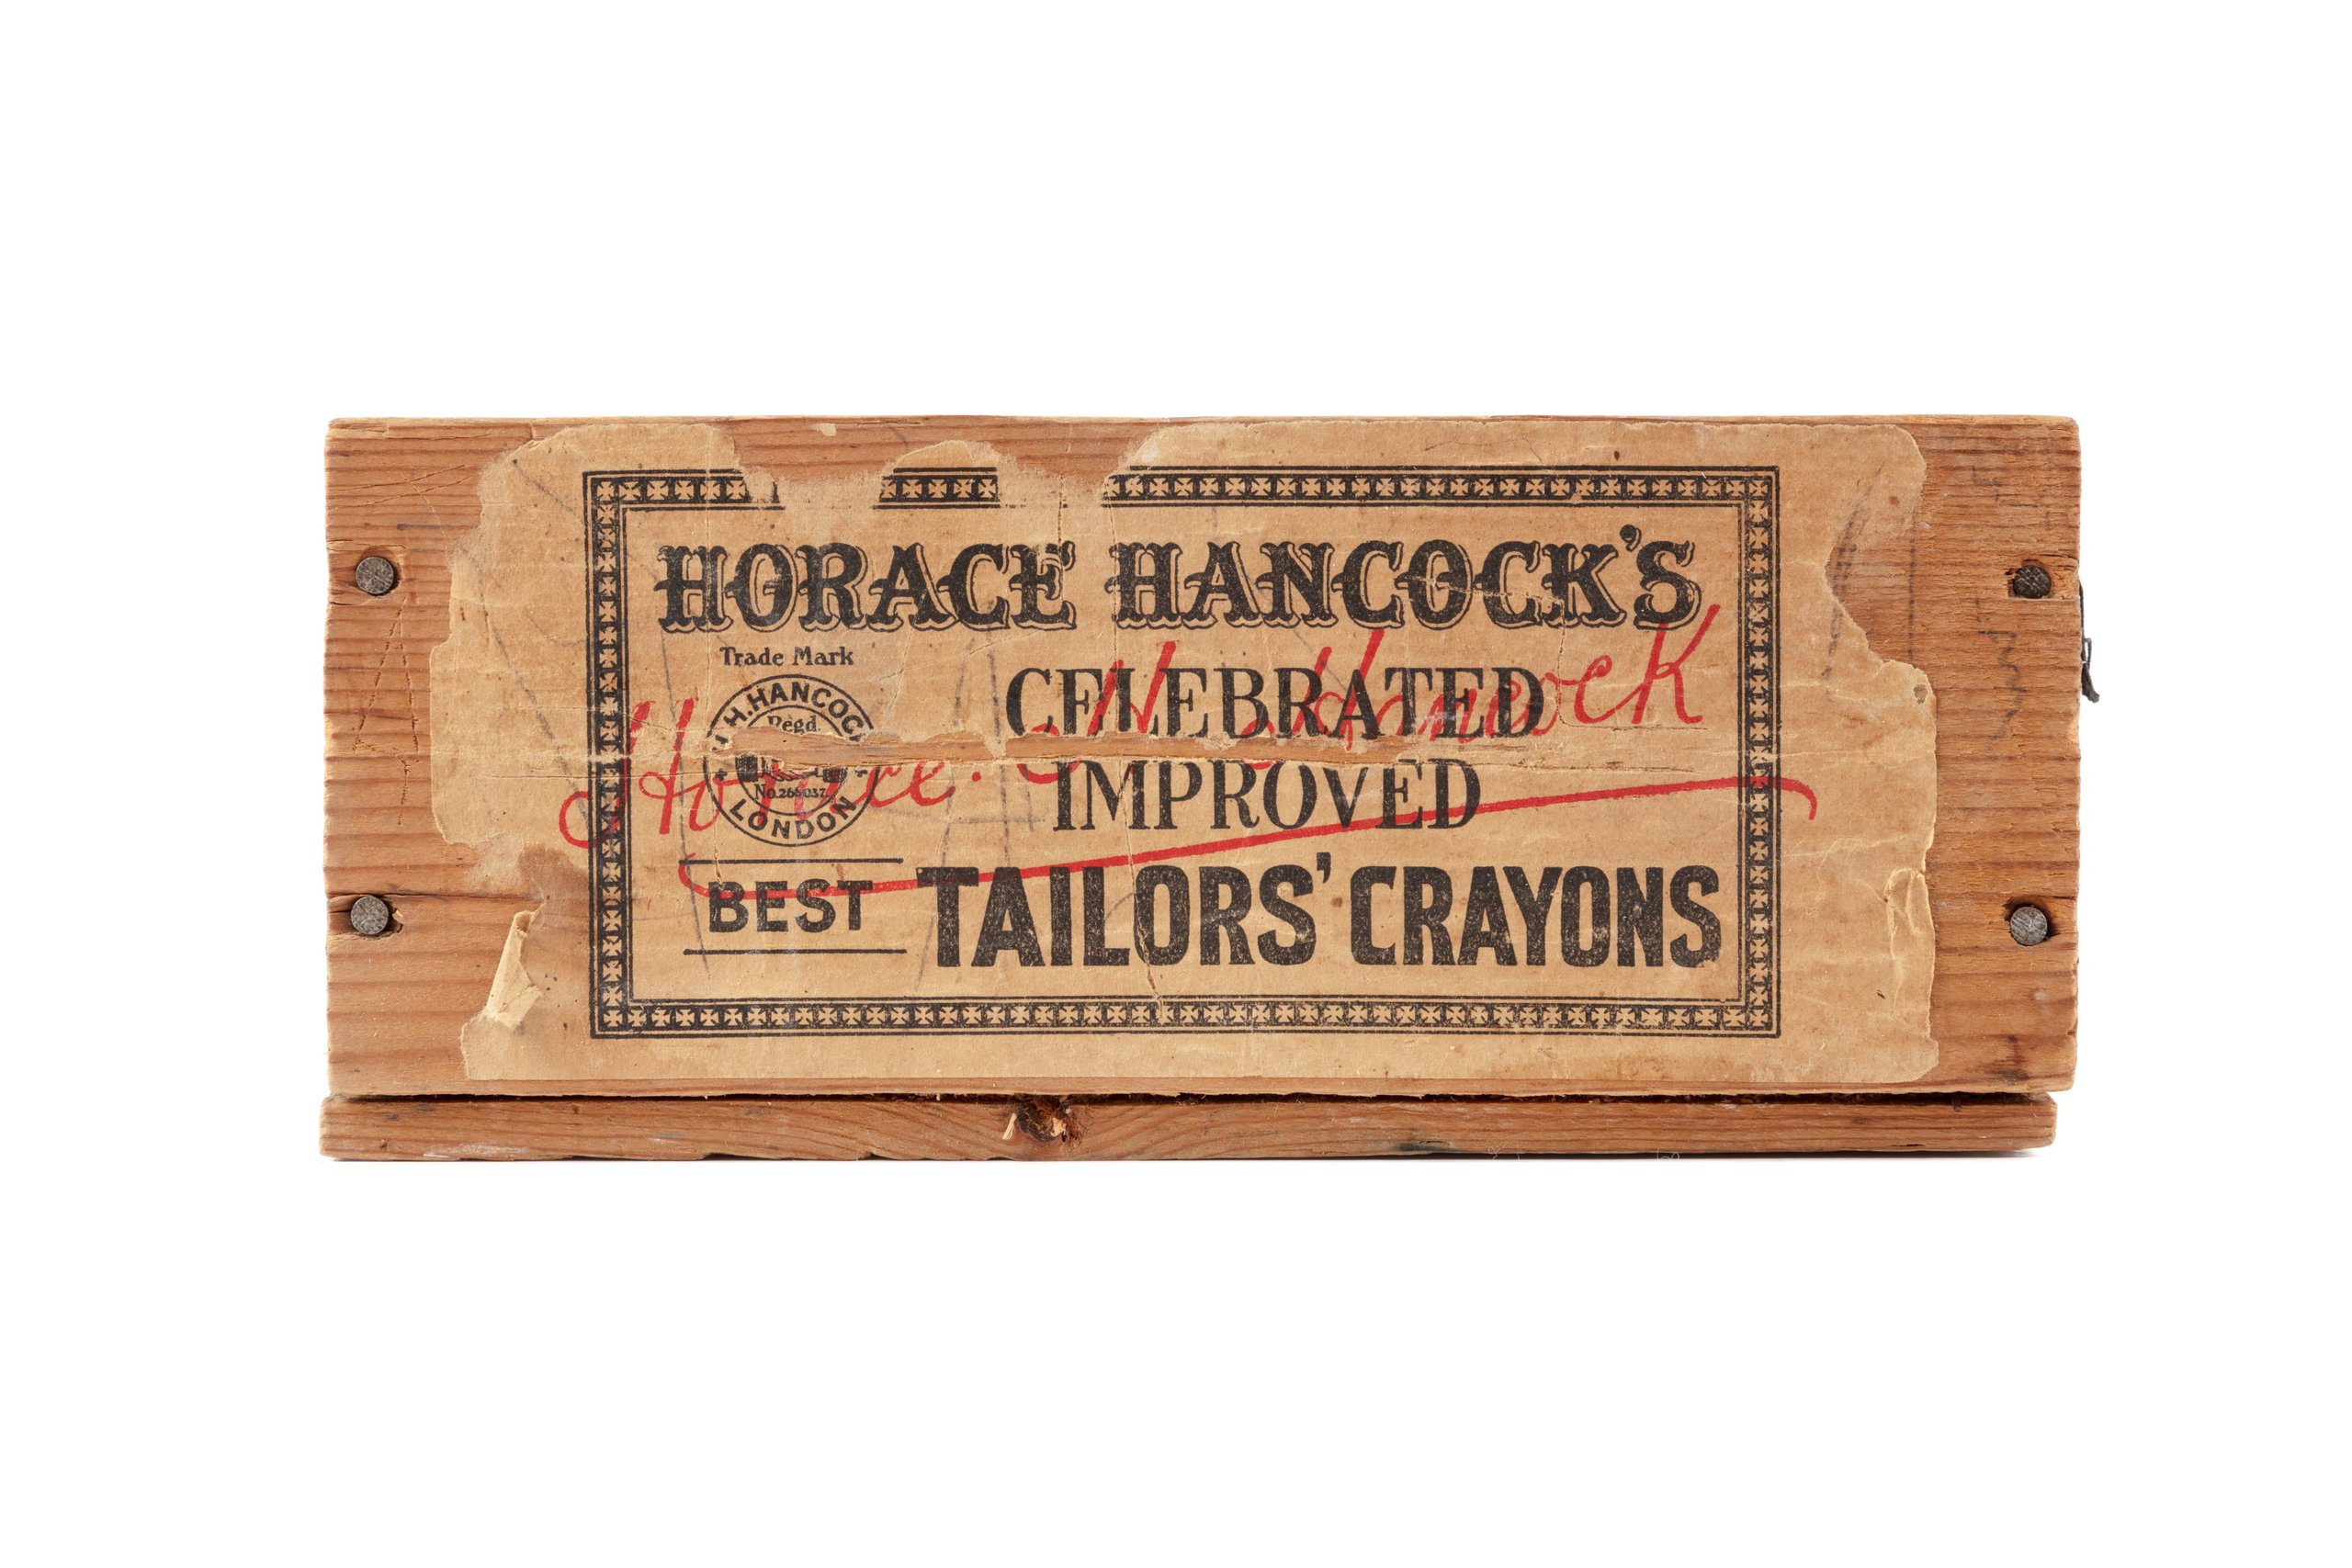 Tailors chalk box used by Ron and Maxwell Gillman